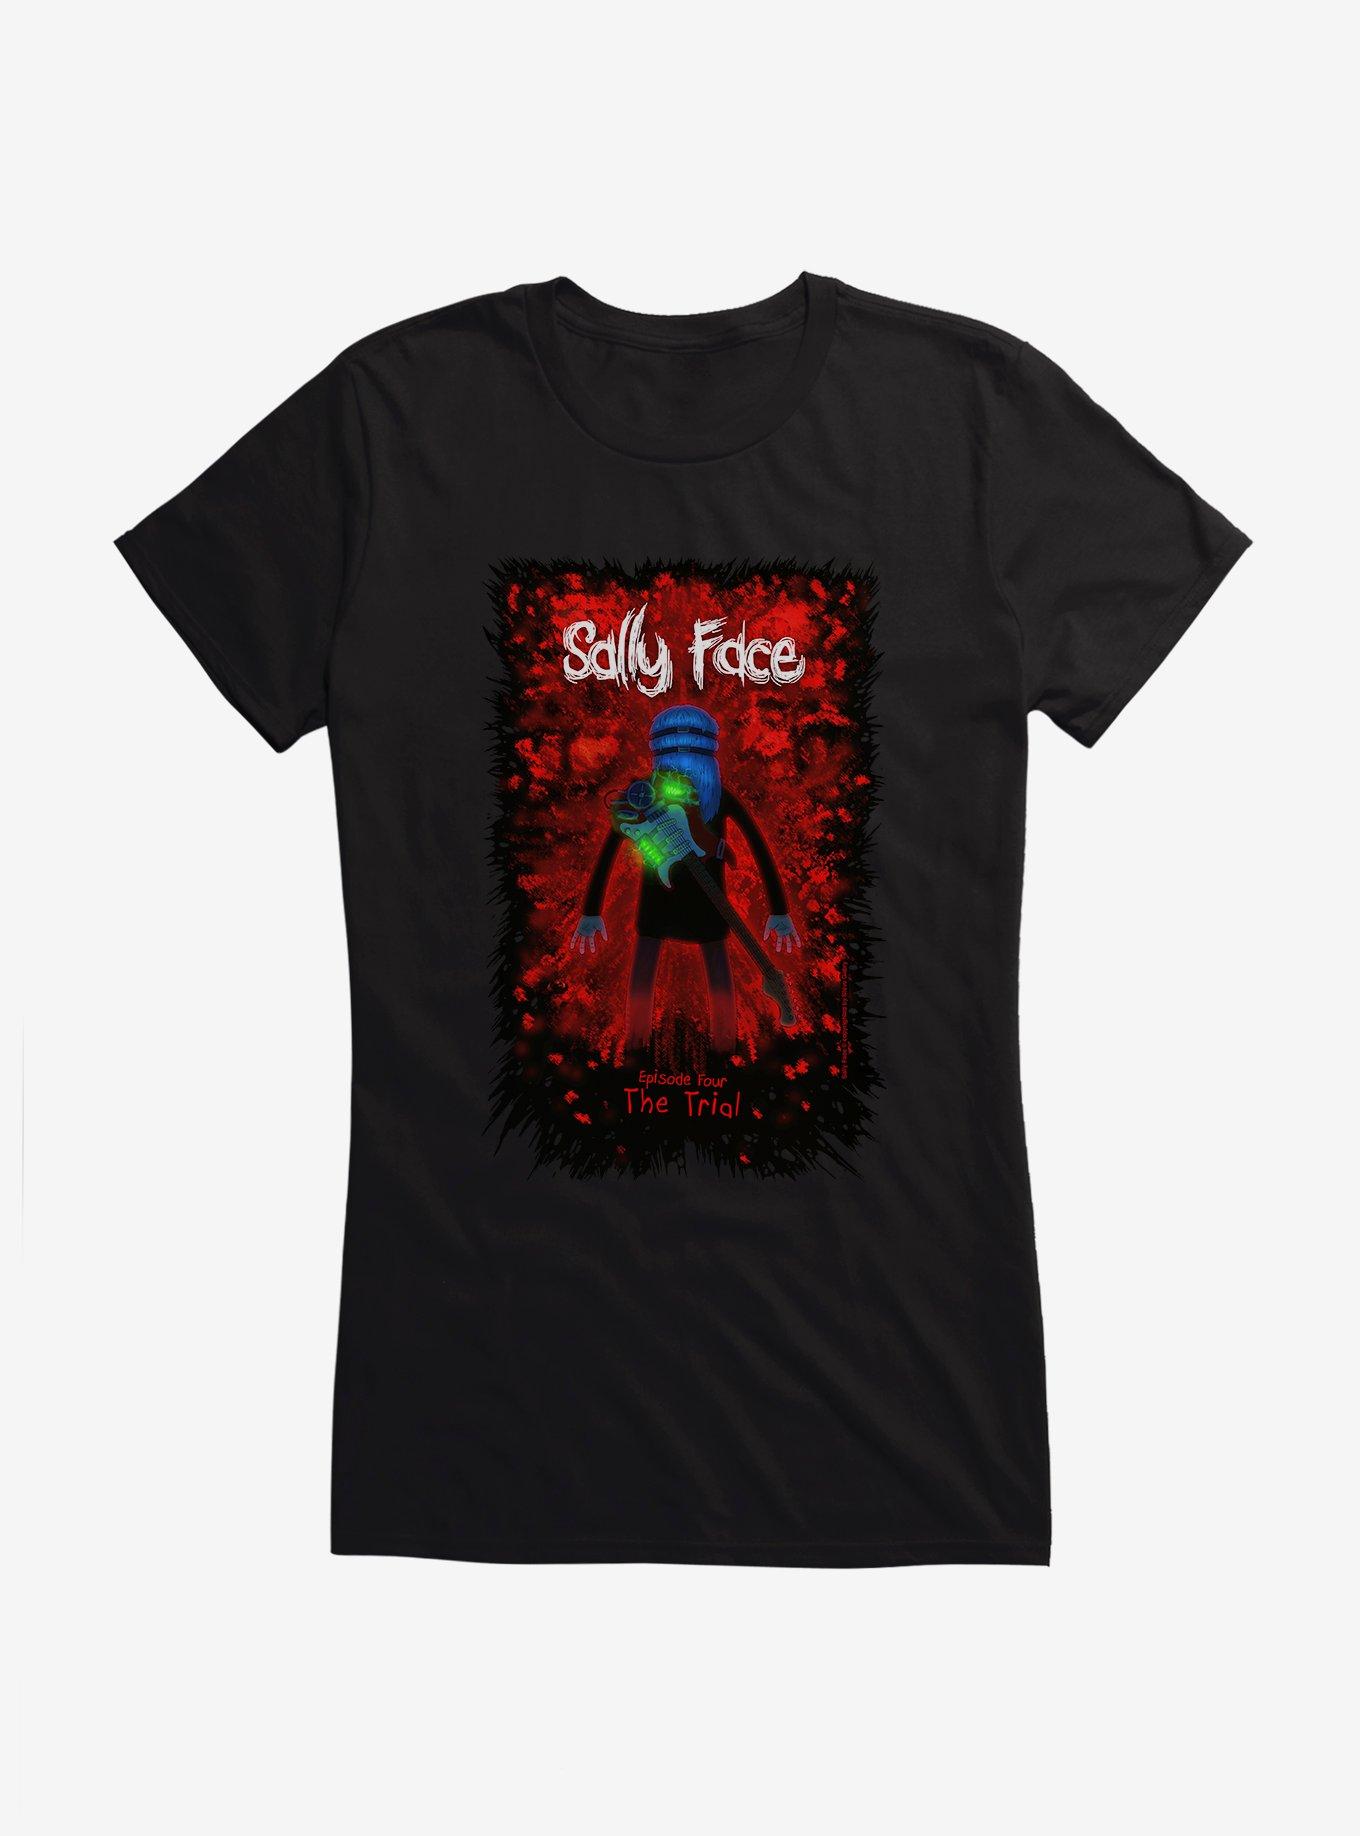 Sally Face Episode Four: The Trial Girls T-Shirt, BLACK, hi-res